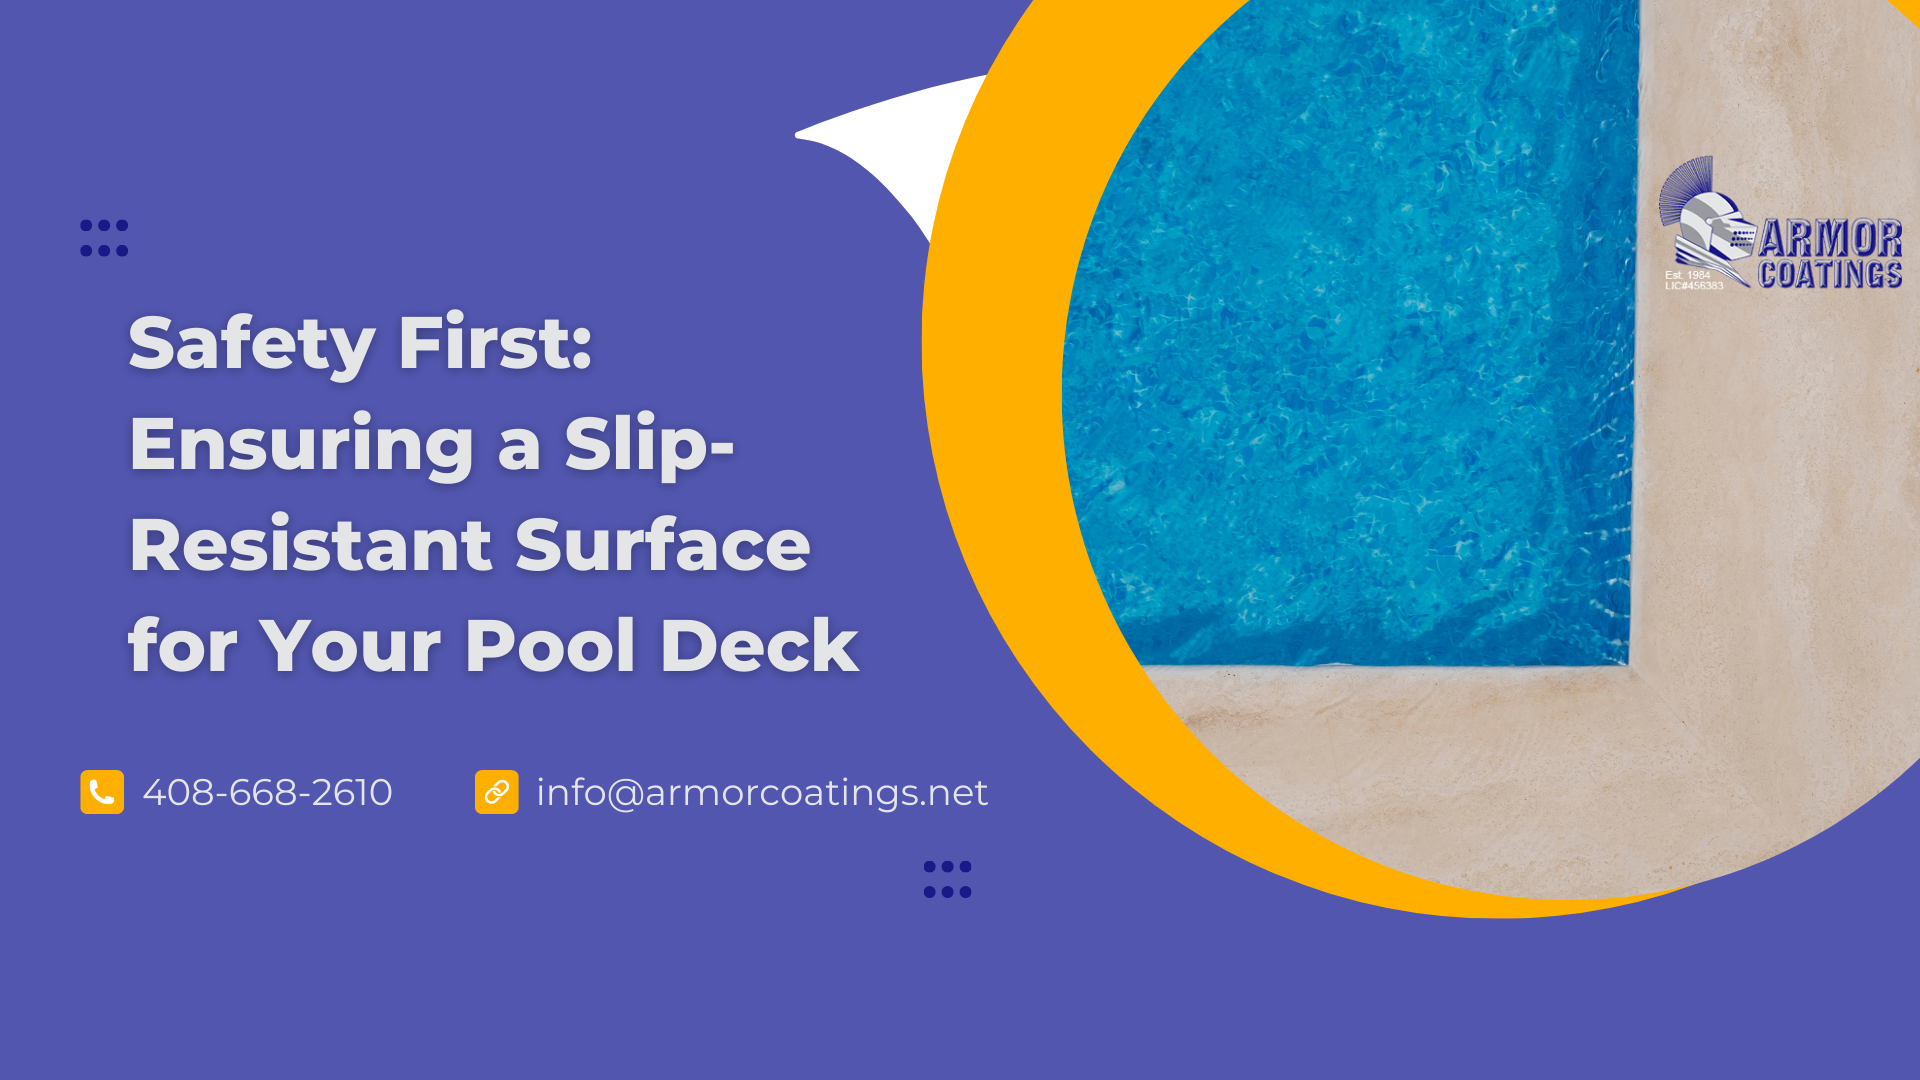 Safety First: Ensuring a Slip-Resistant Surface for Your Pool Deck